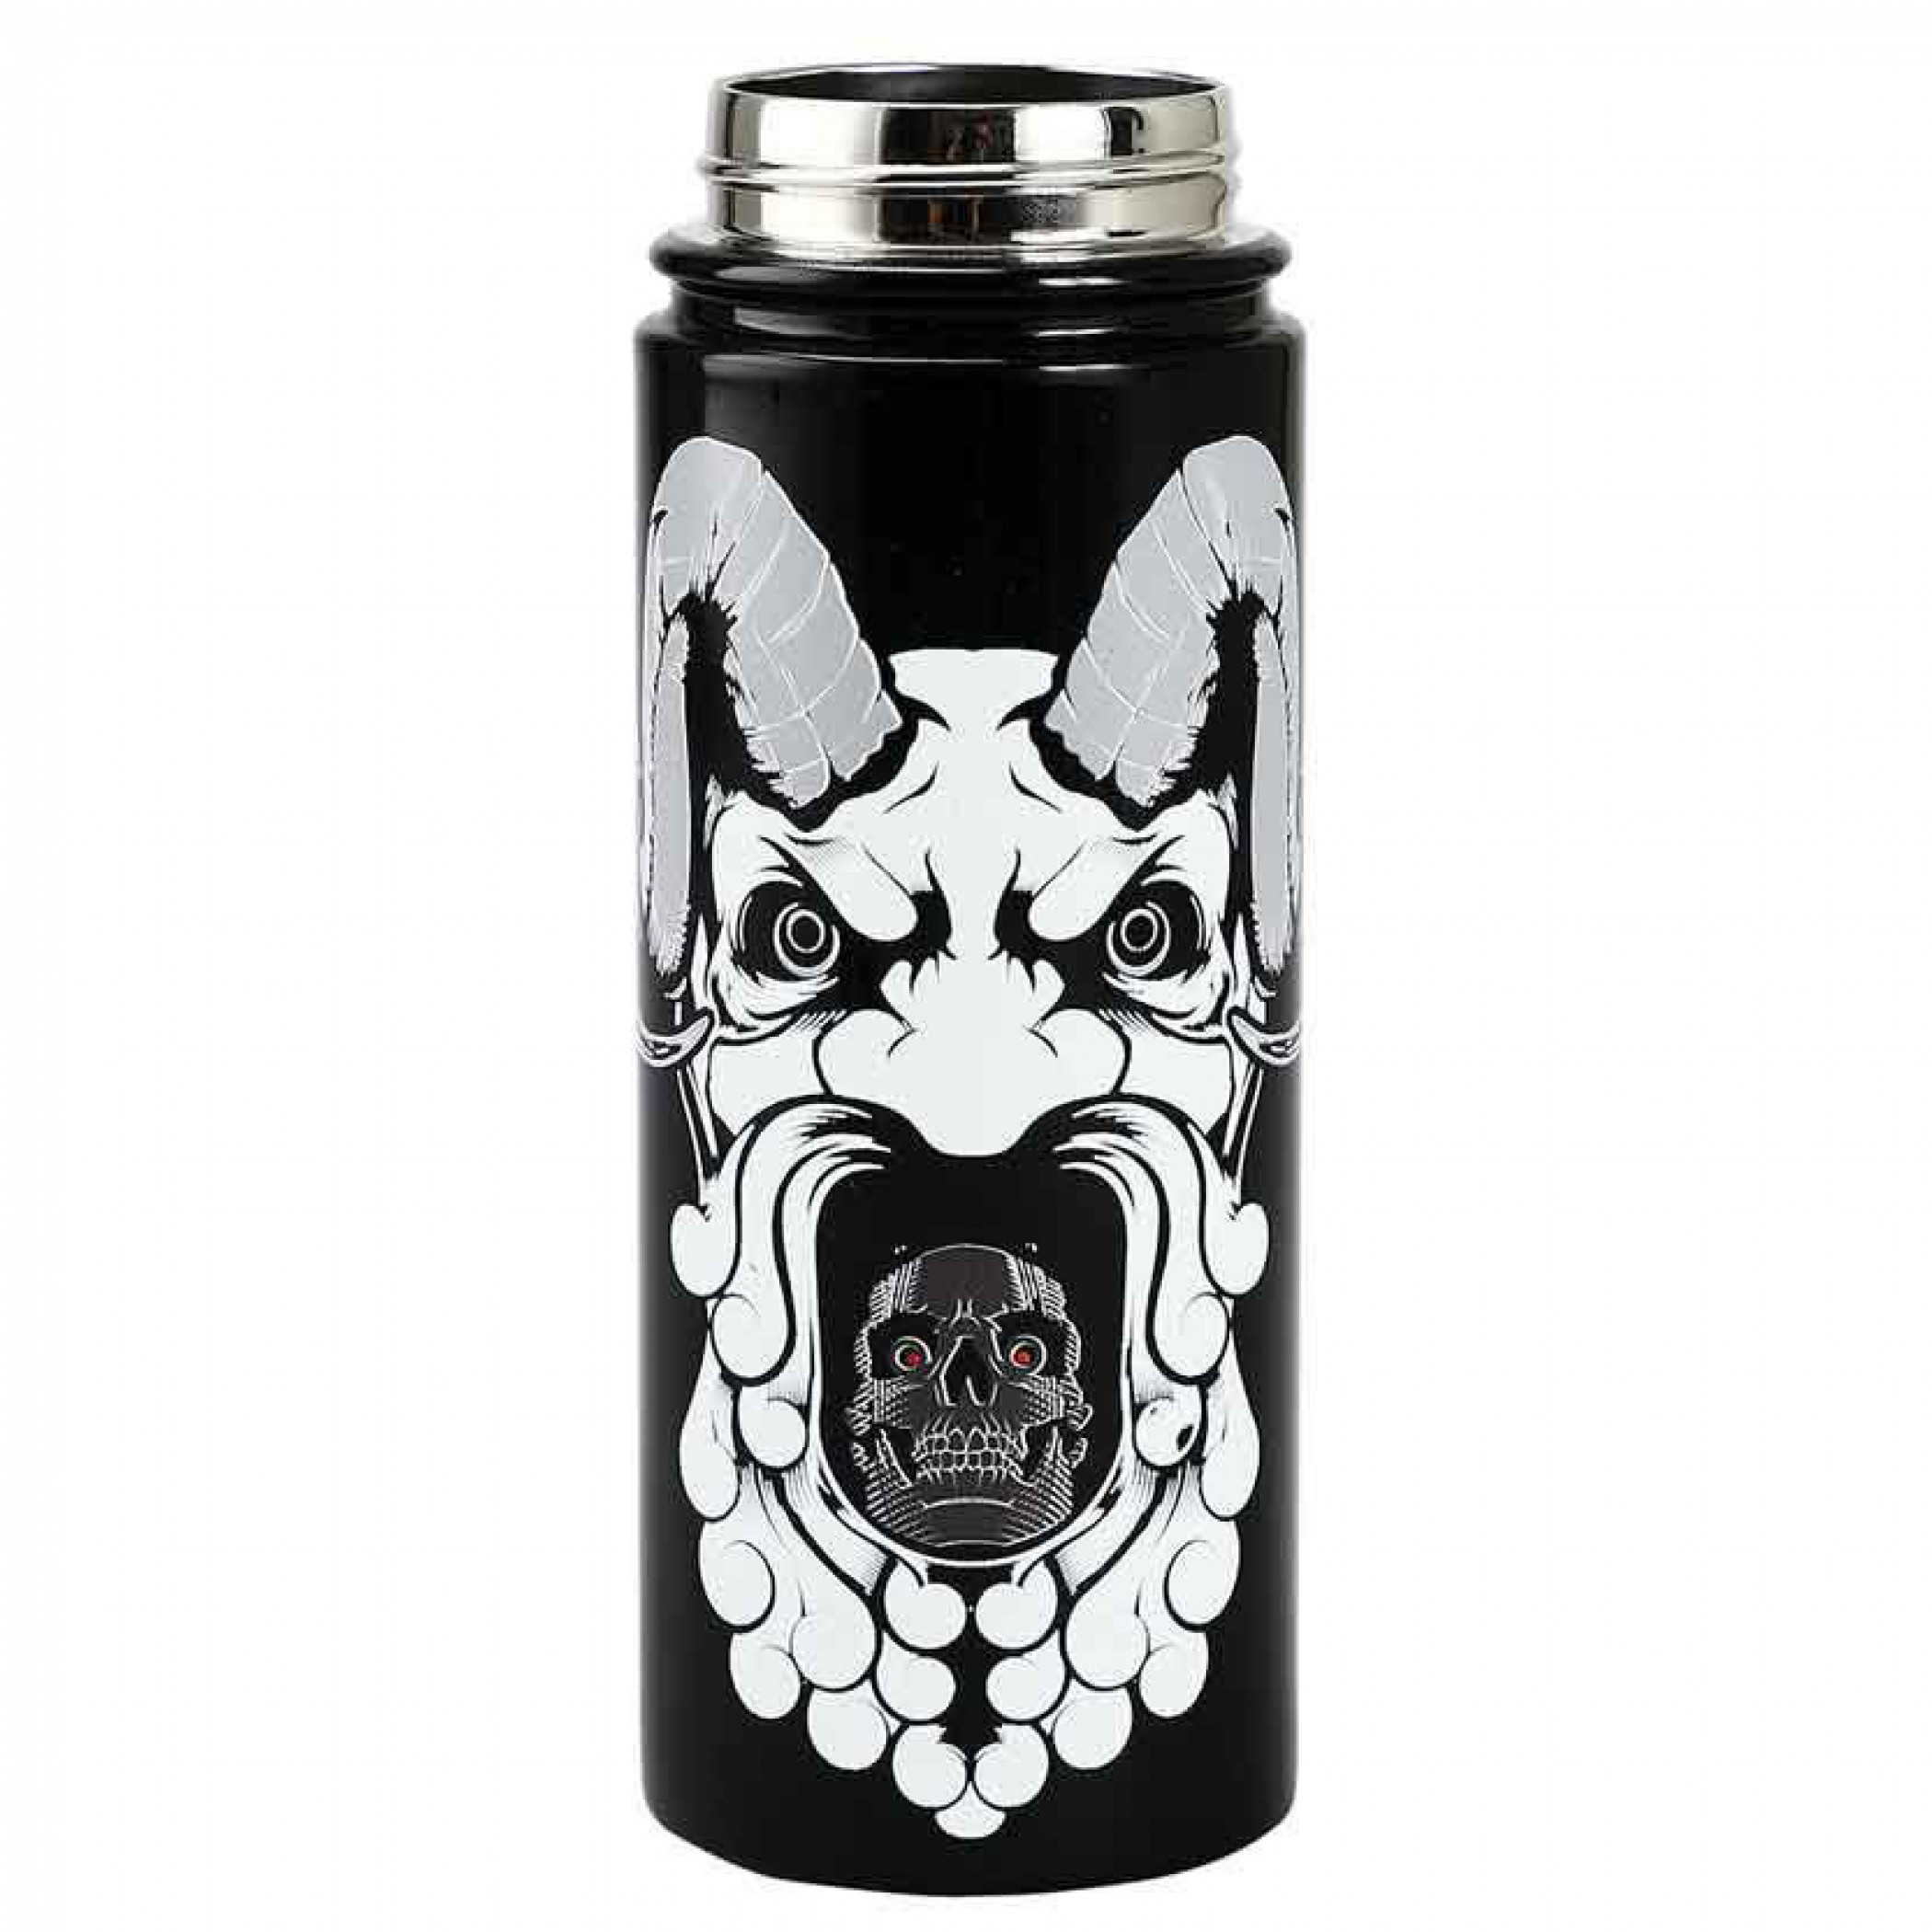 Dungeons & Dragons 17 oz. Stainless Steel Water Bottle